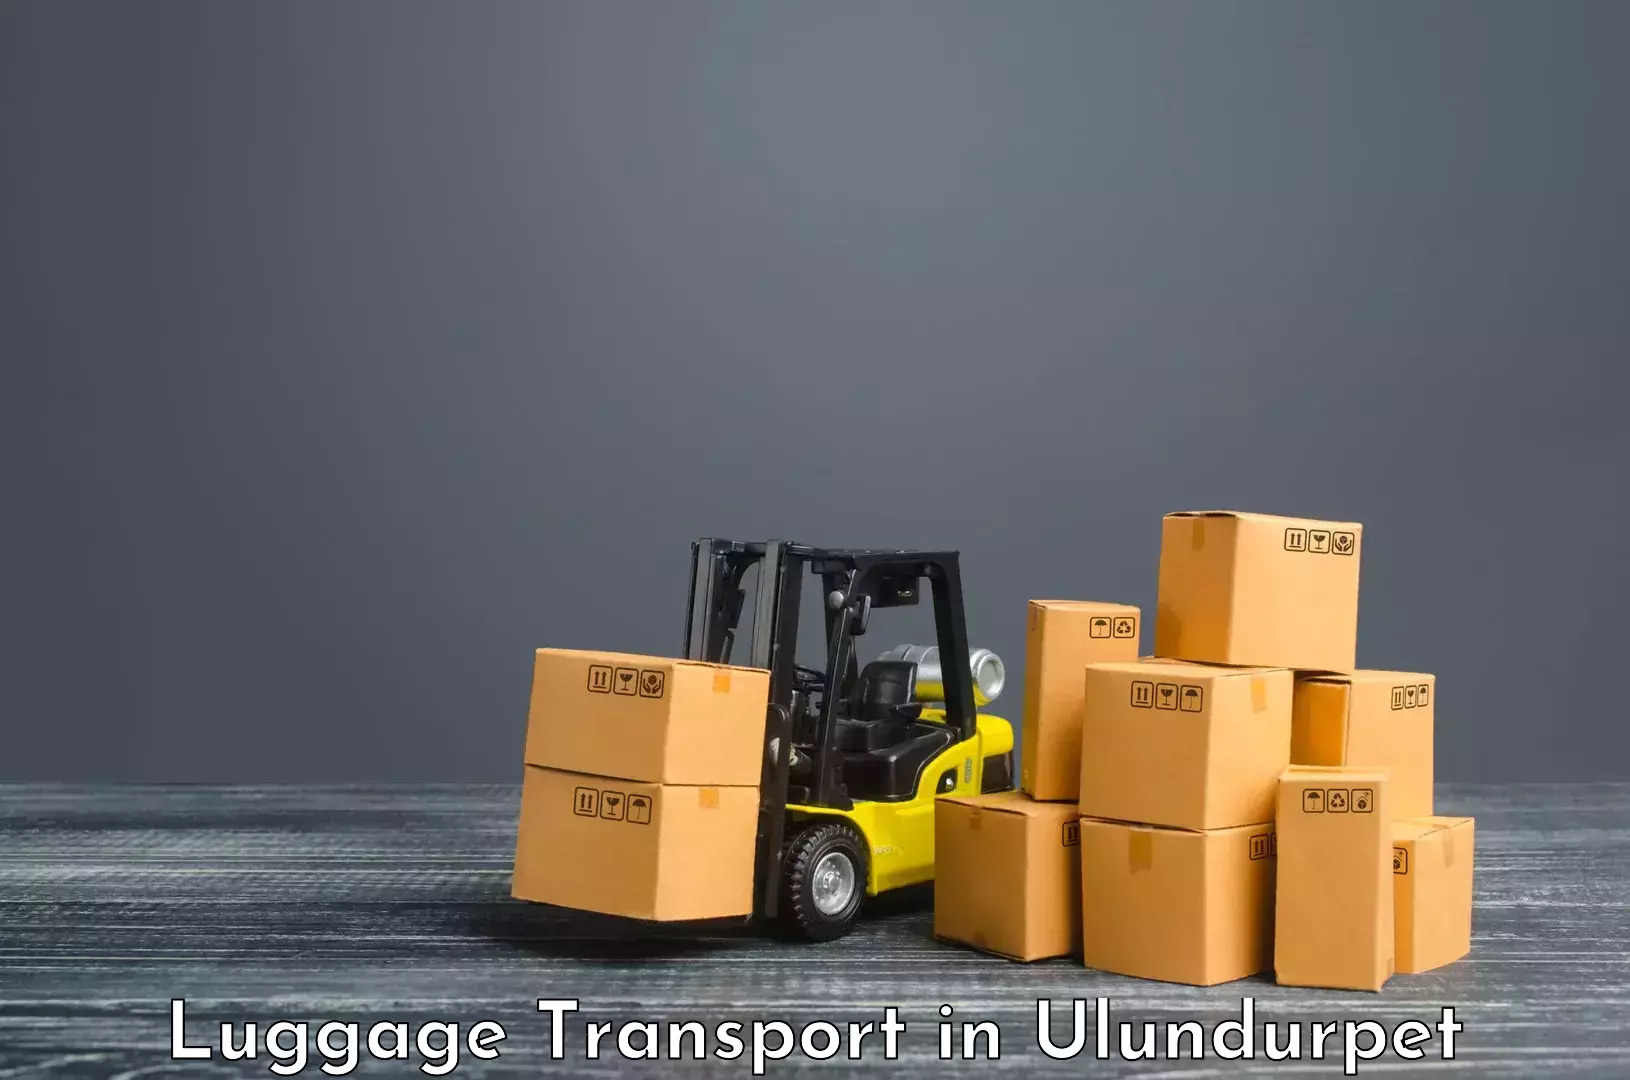 Luggage delivery logistics in Ulundurpet